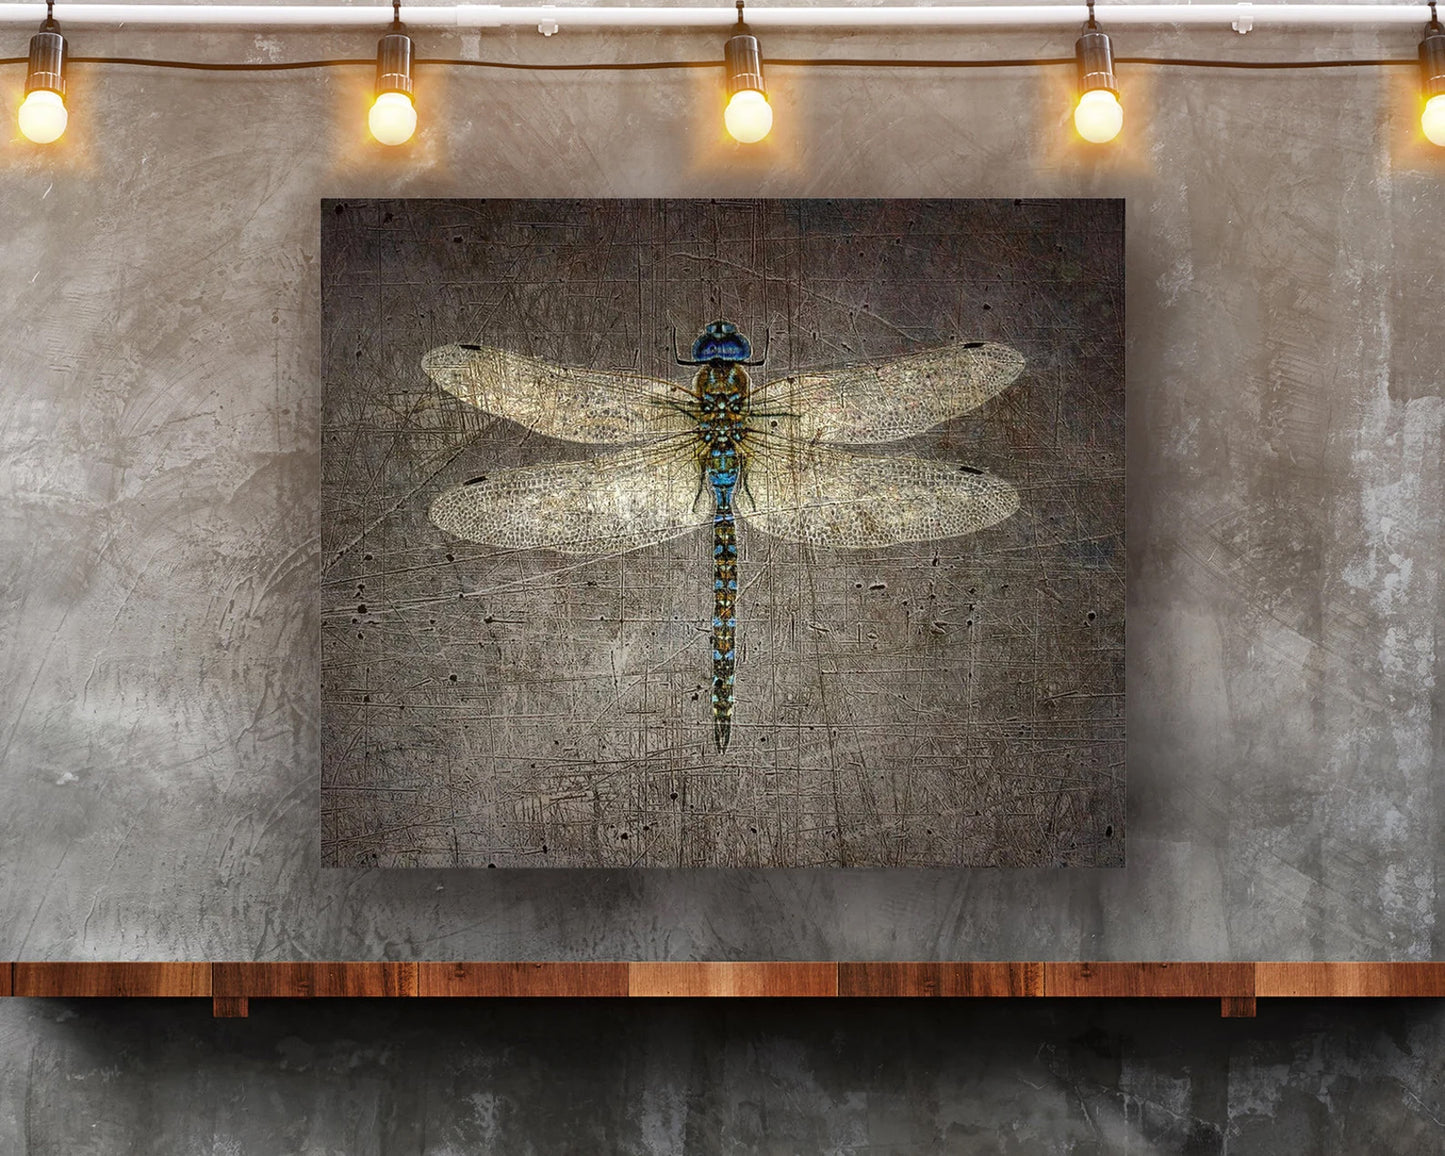 Dragonfly on Distressed Stone Background Printed on Rectangular Eco-Friendly Recycled Aluminum hung